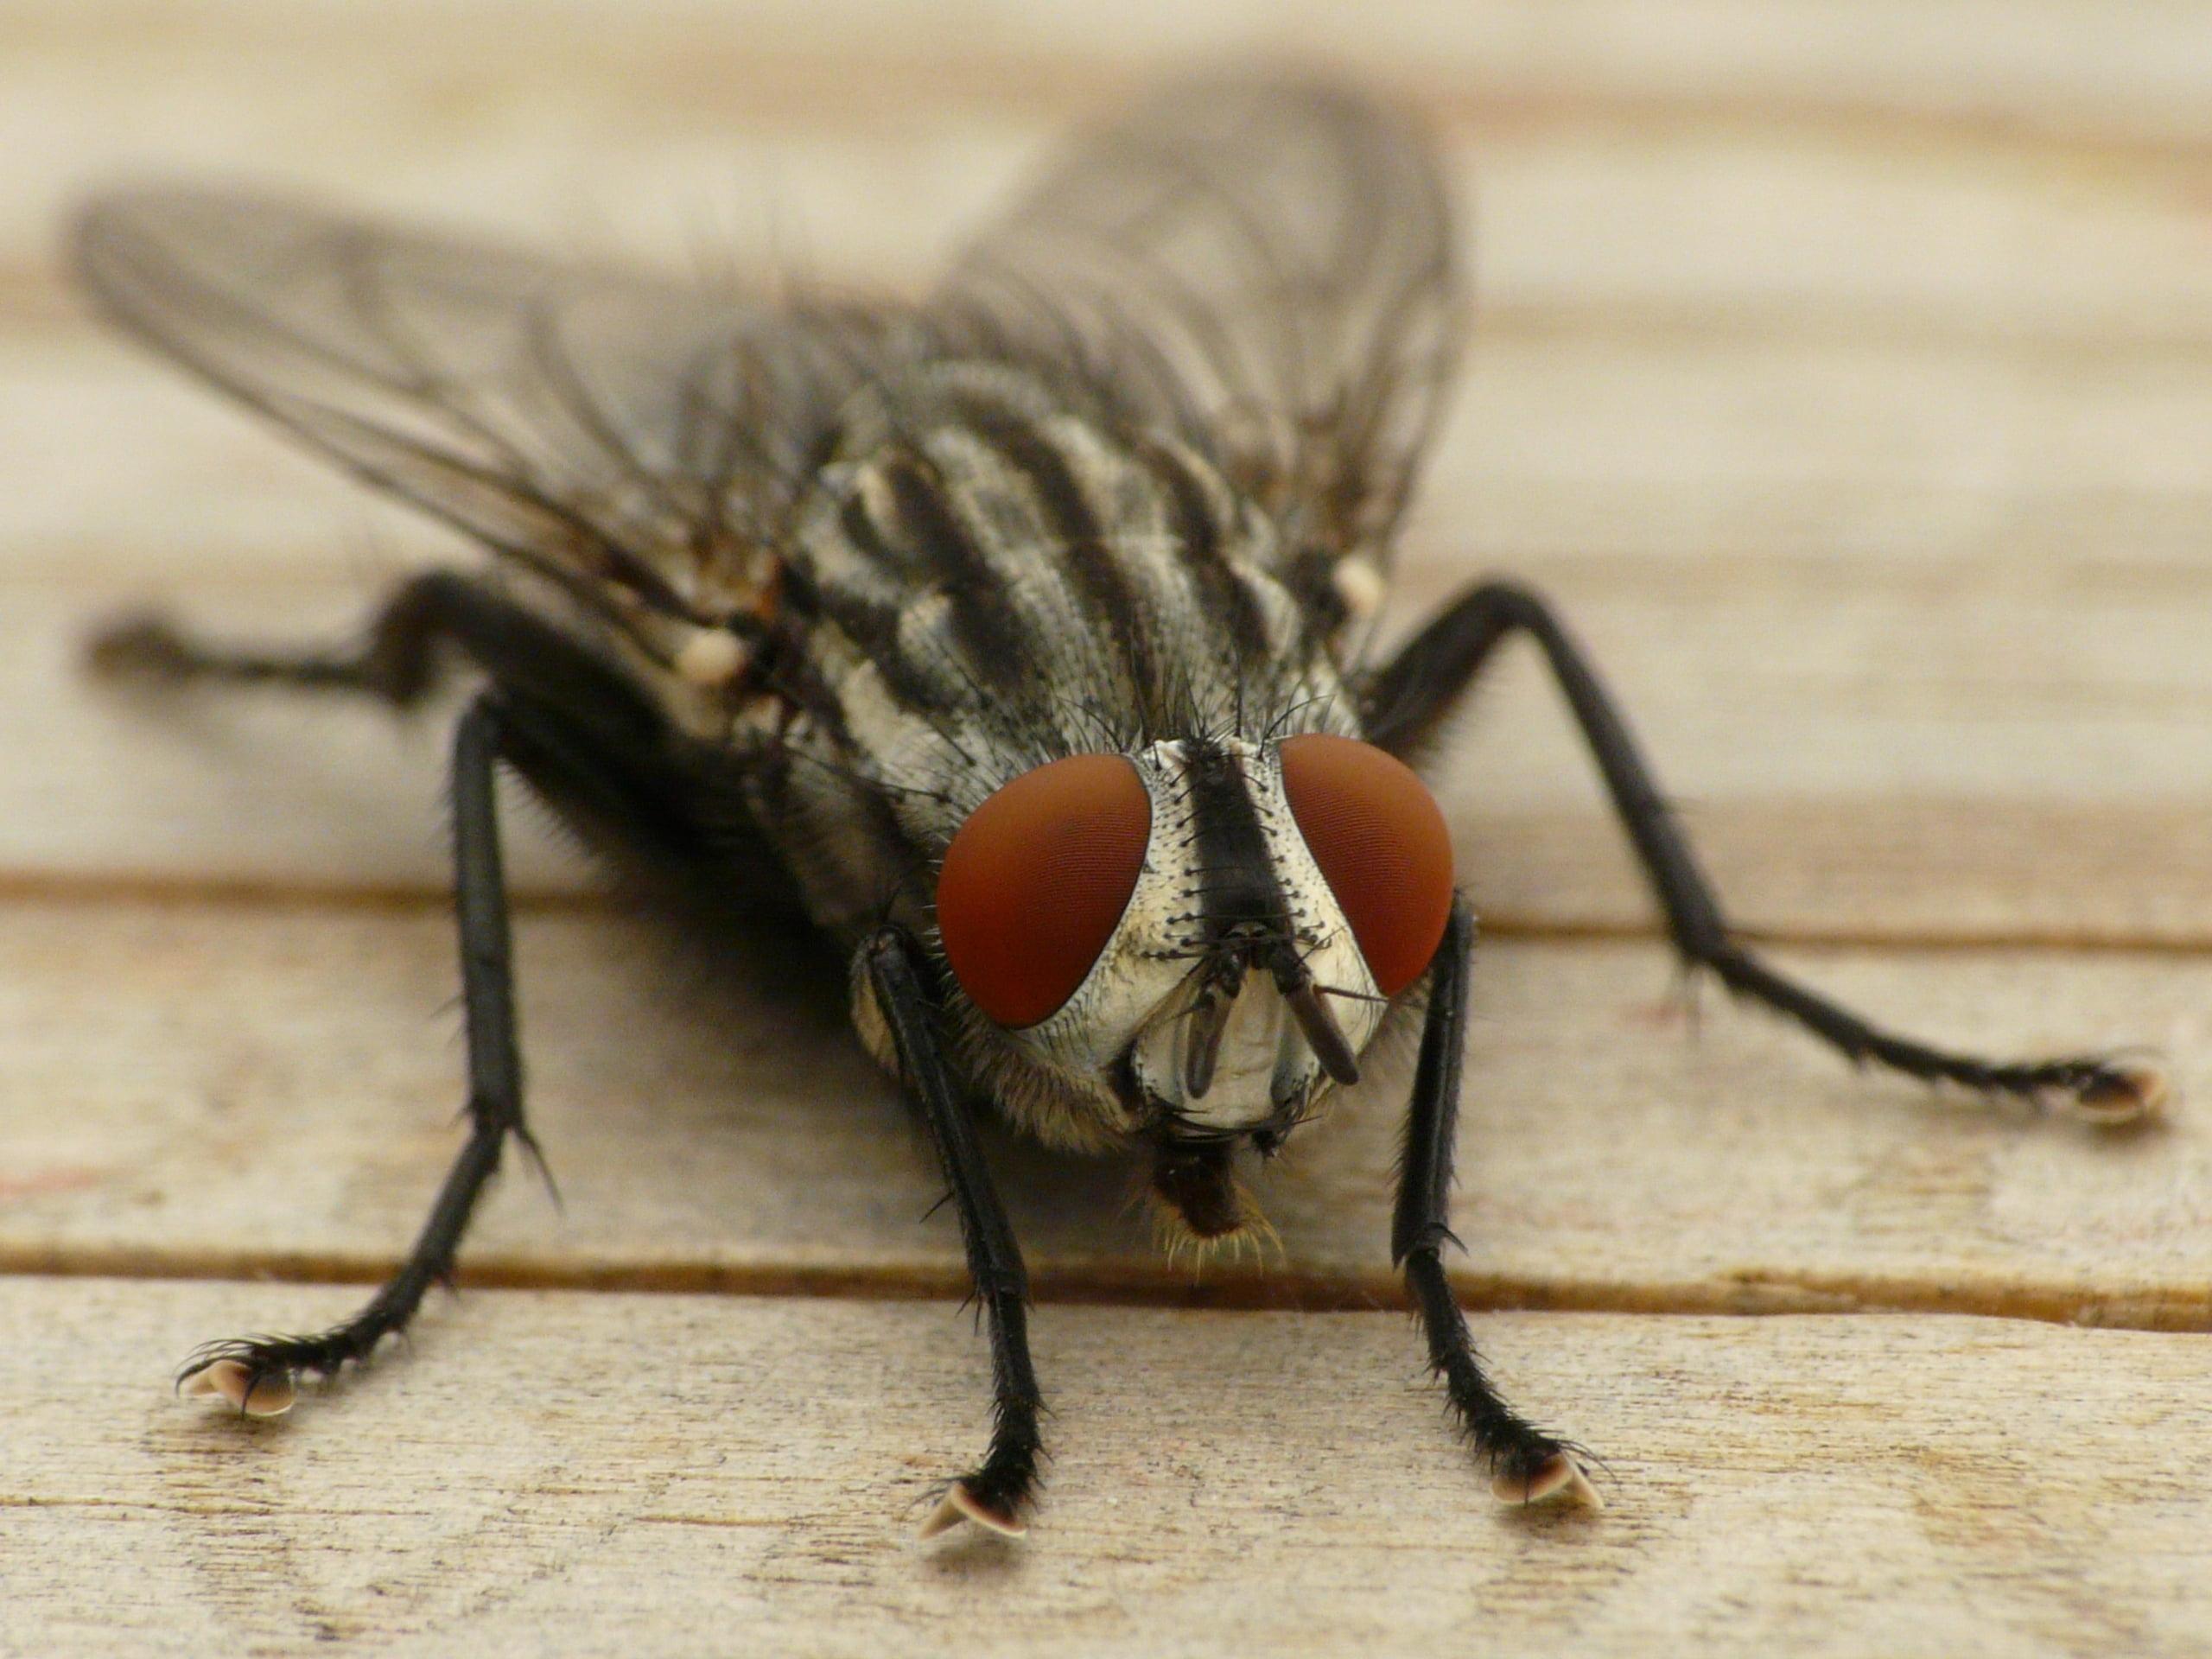 House fly on wood board panel close